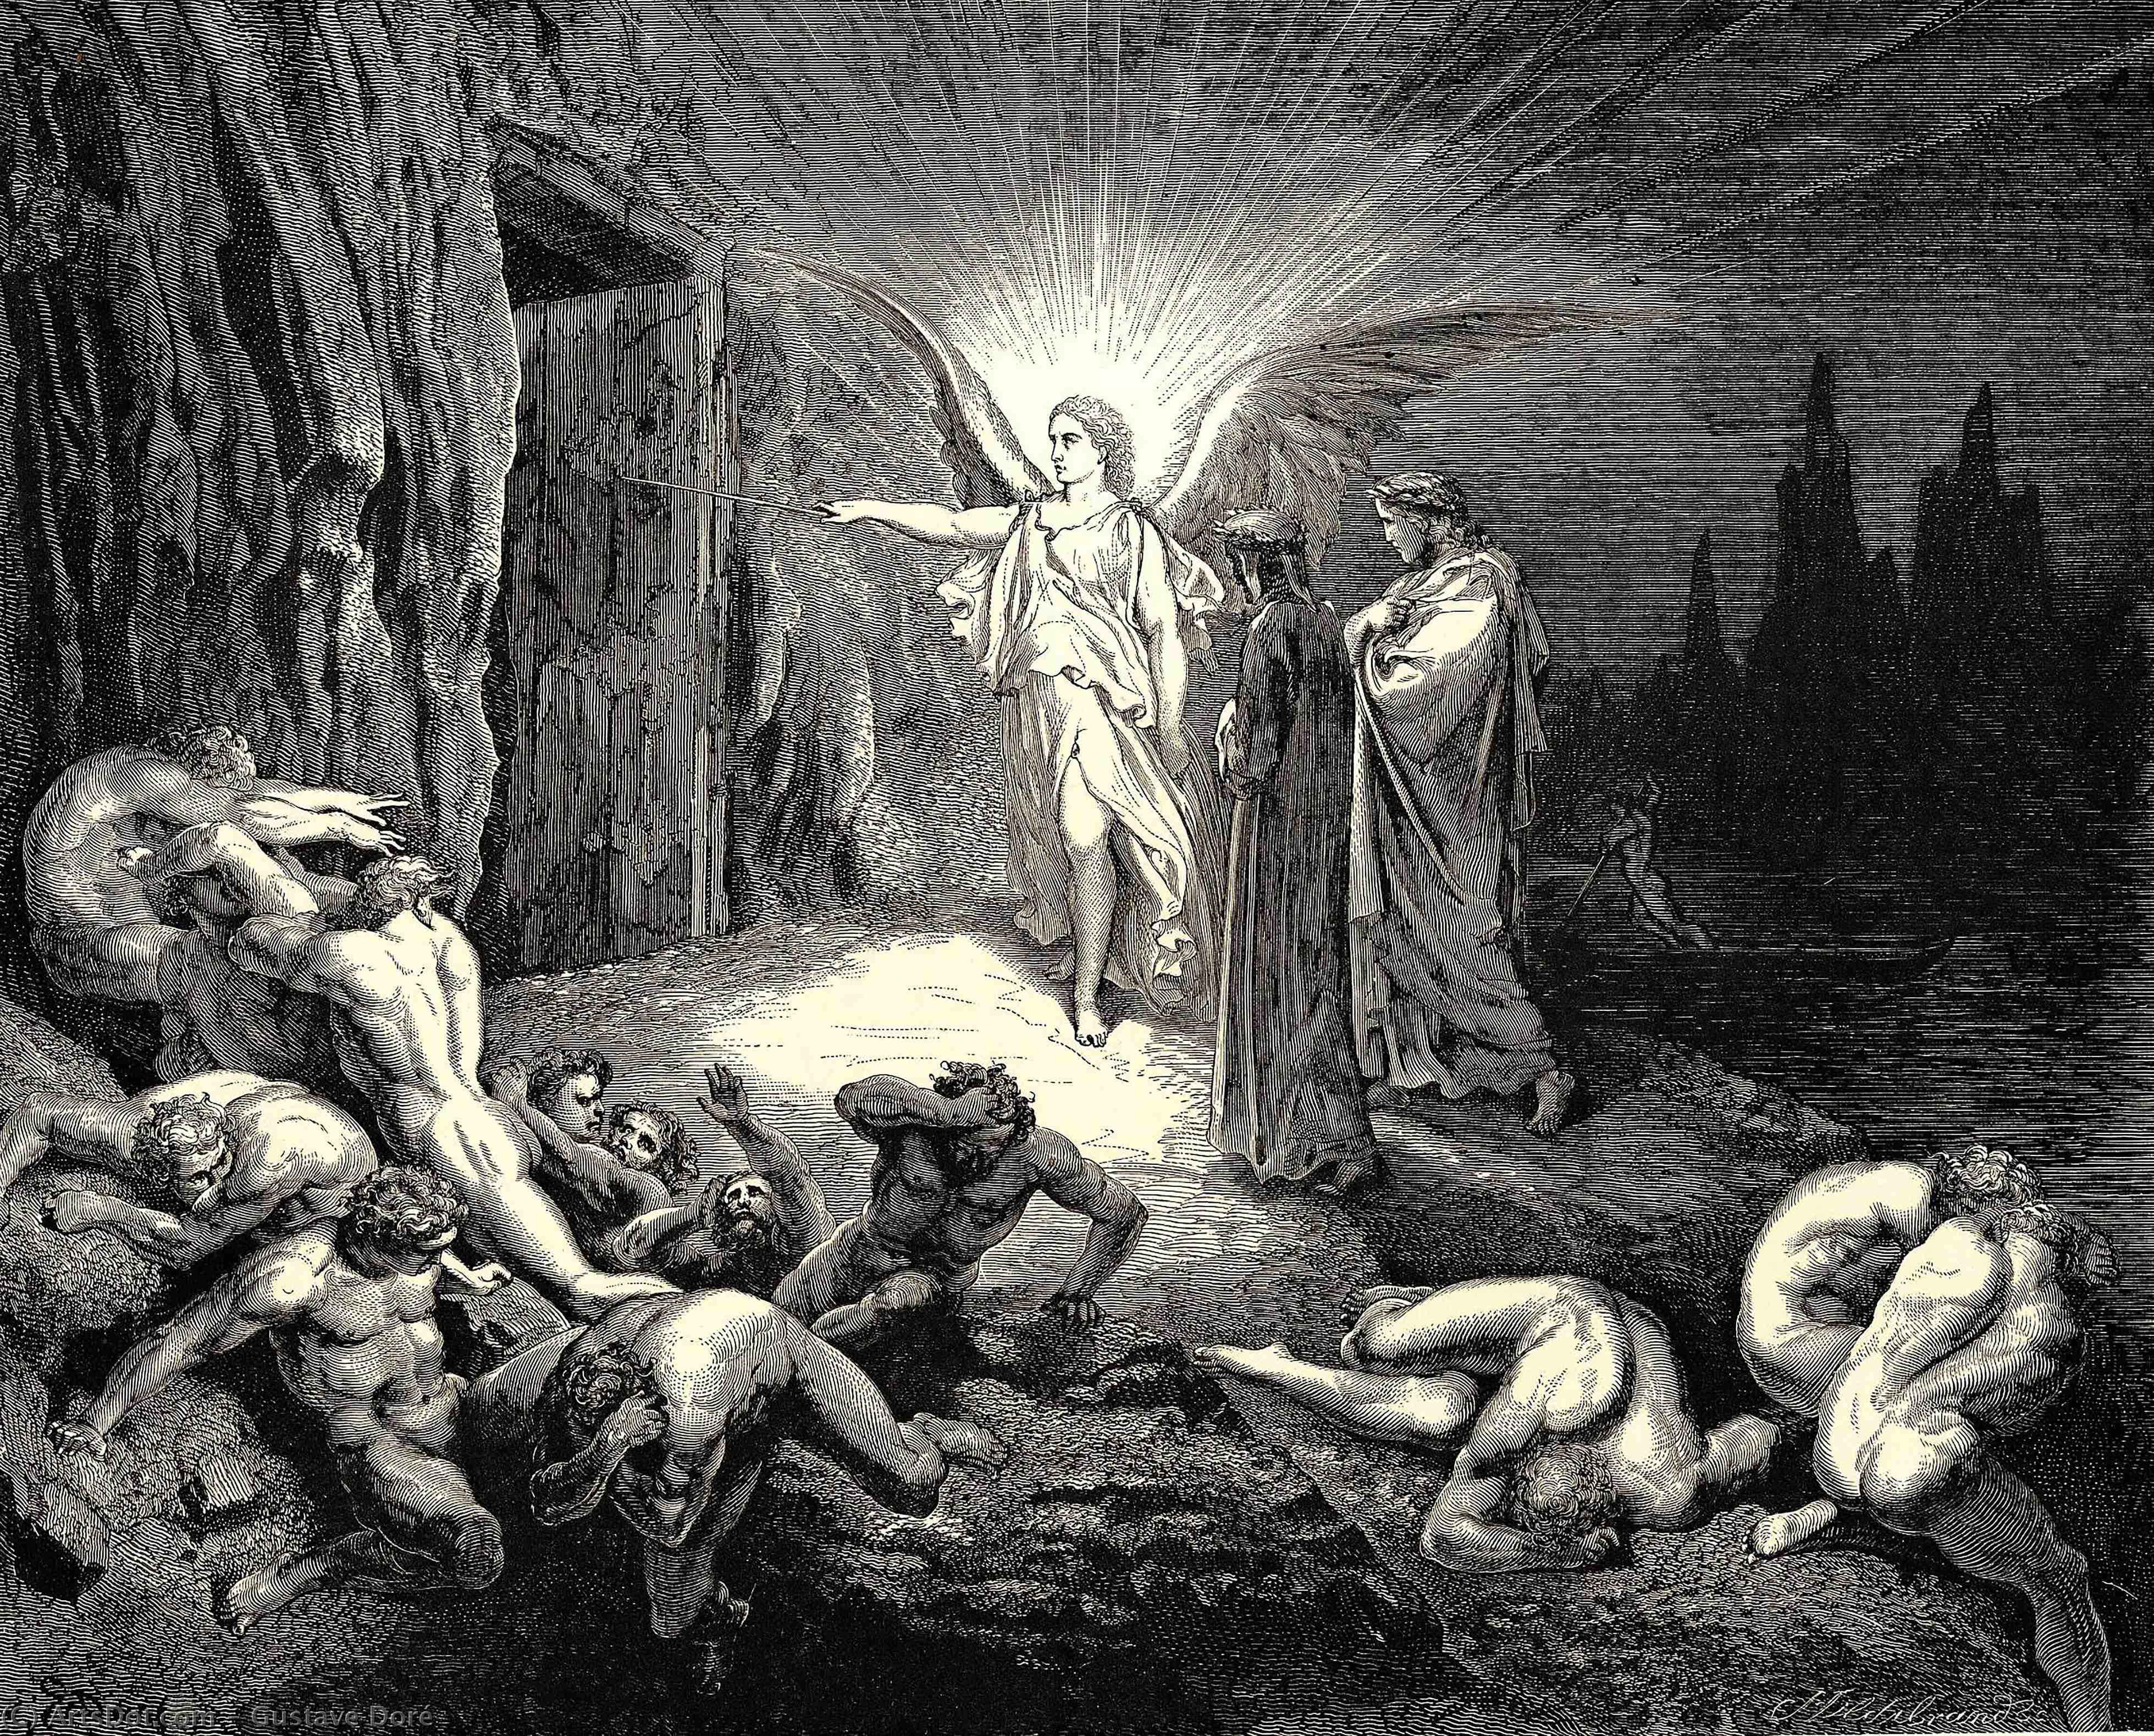 WikiOO.org - دایره المعارف هنرهای زیبا - نقاشی، آثار هنری Paul Gustave Doré - The Inferno, Canto 9, lines 87-89. To the gate He came, and with his wand touch’d it, whereat Open without impediment it flew.